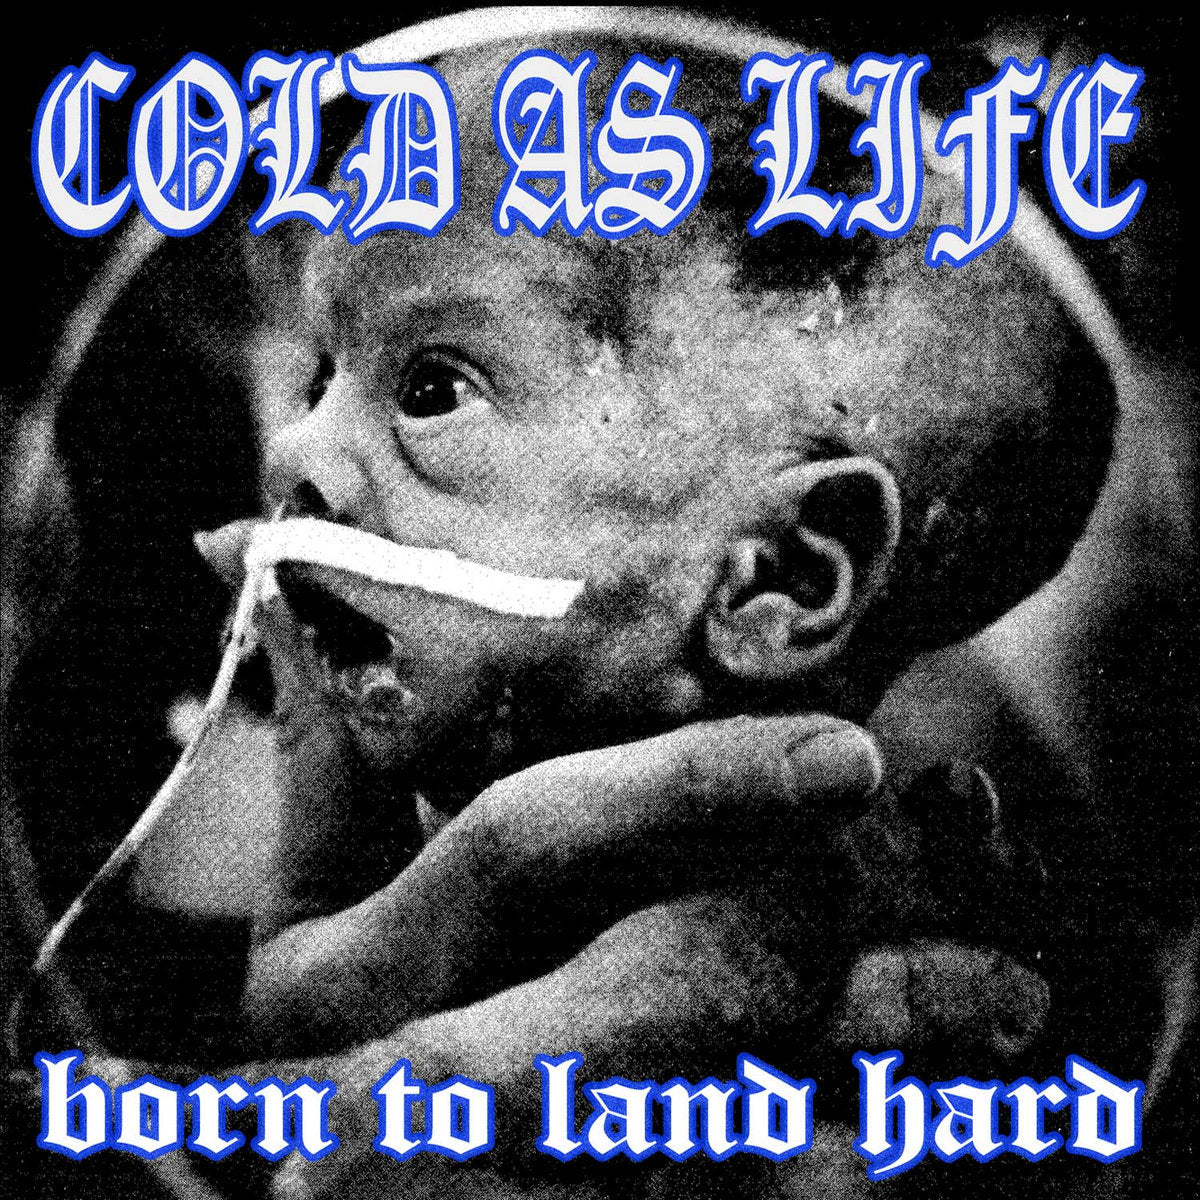 Cold As Life "Born To Land" CD